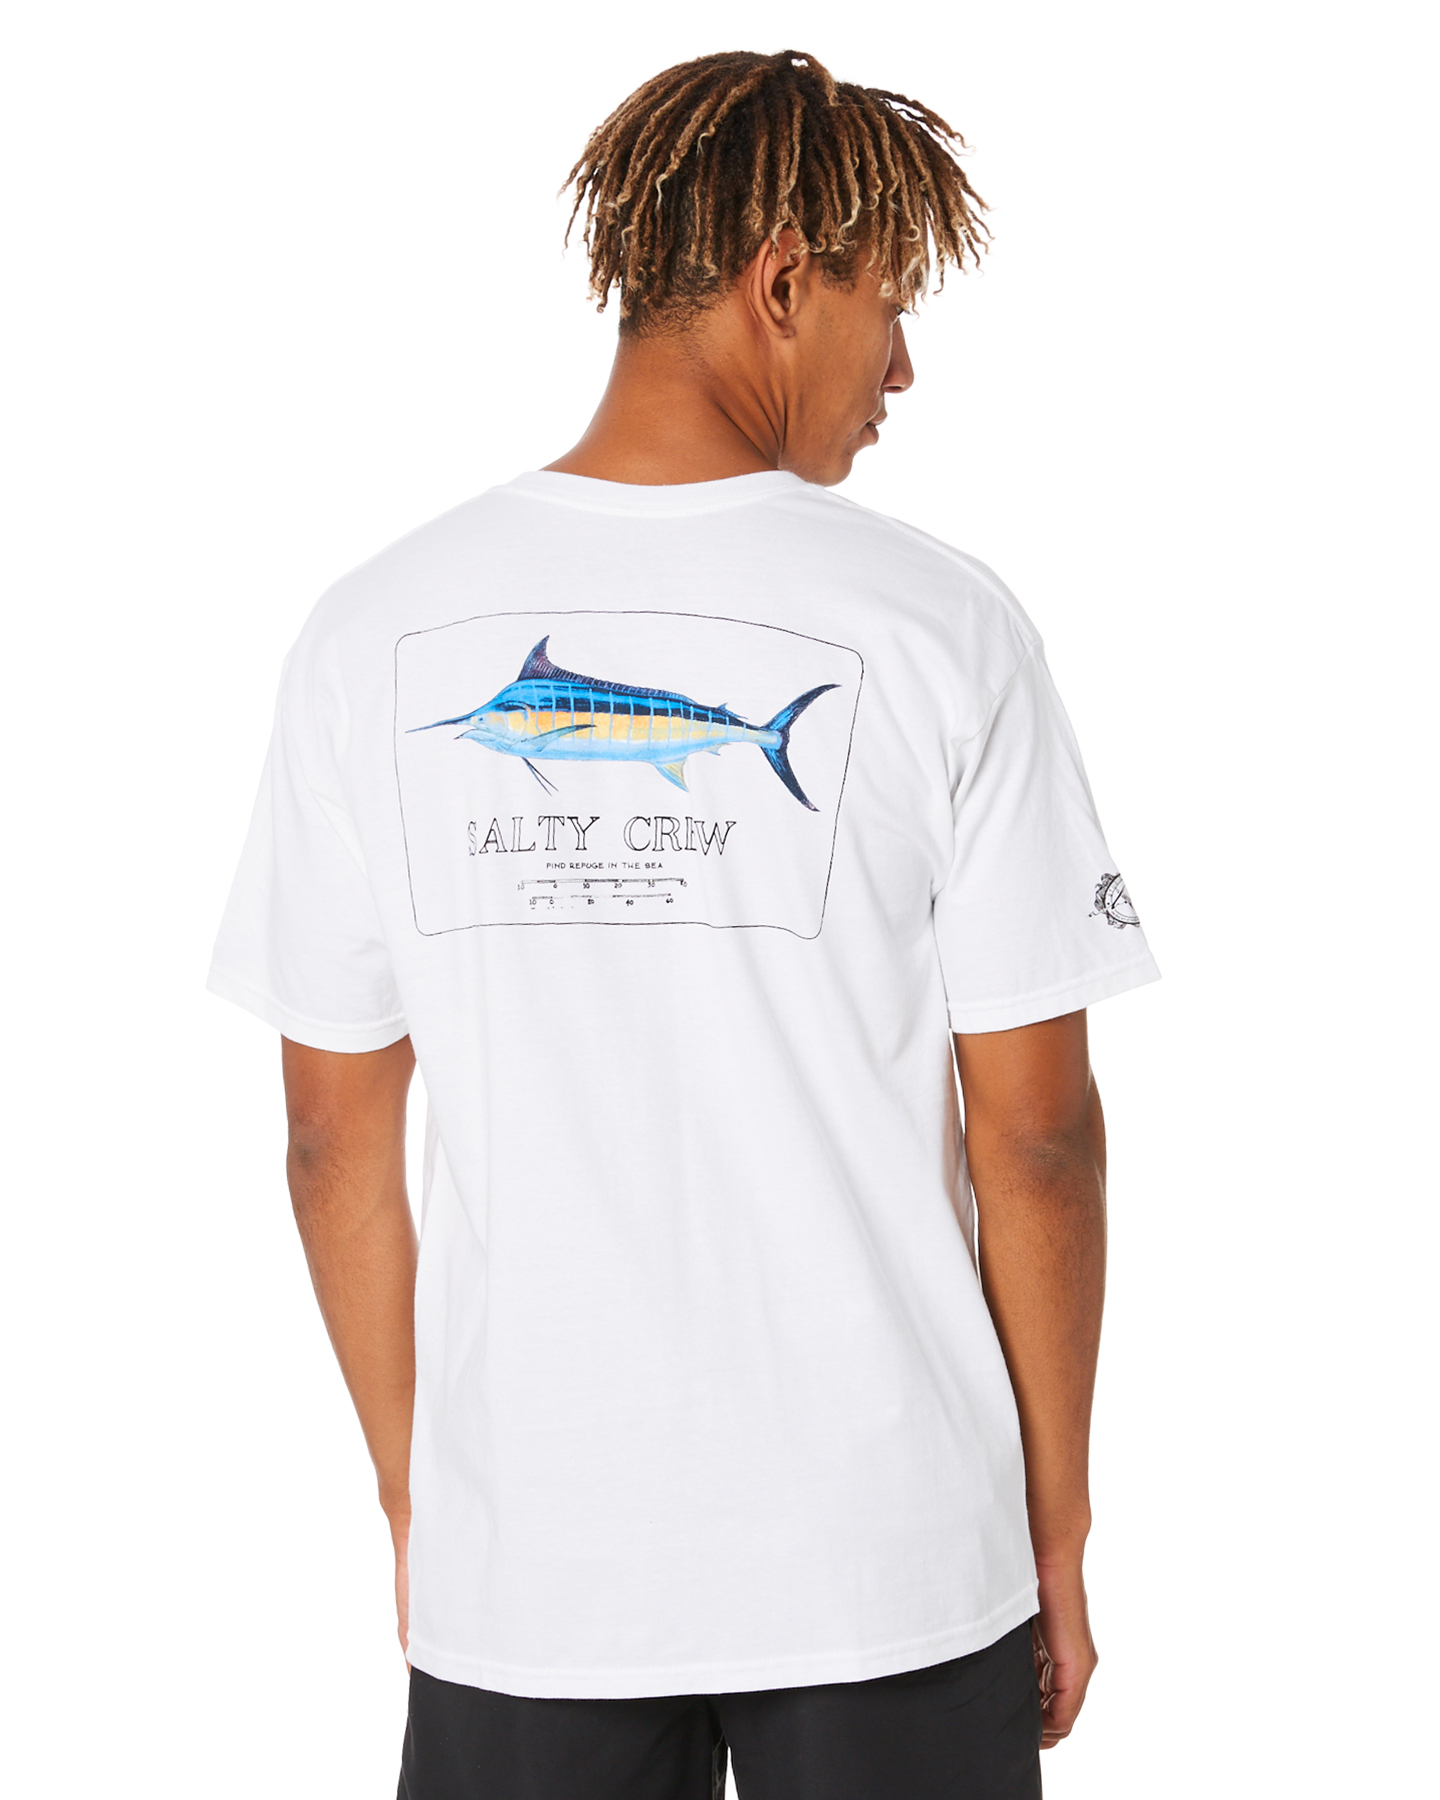 Salty Crew Blue Rogers Mens Tee - White | SurfStitch